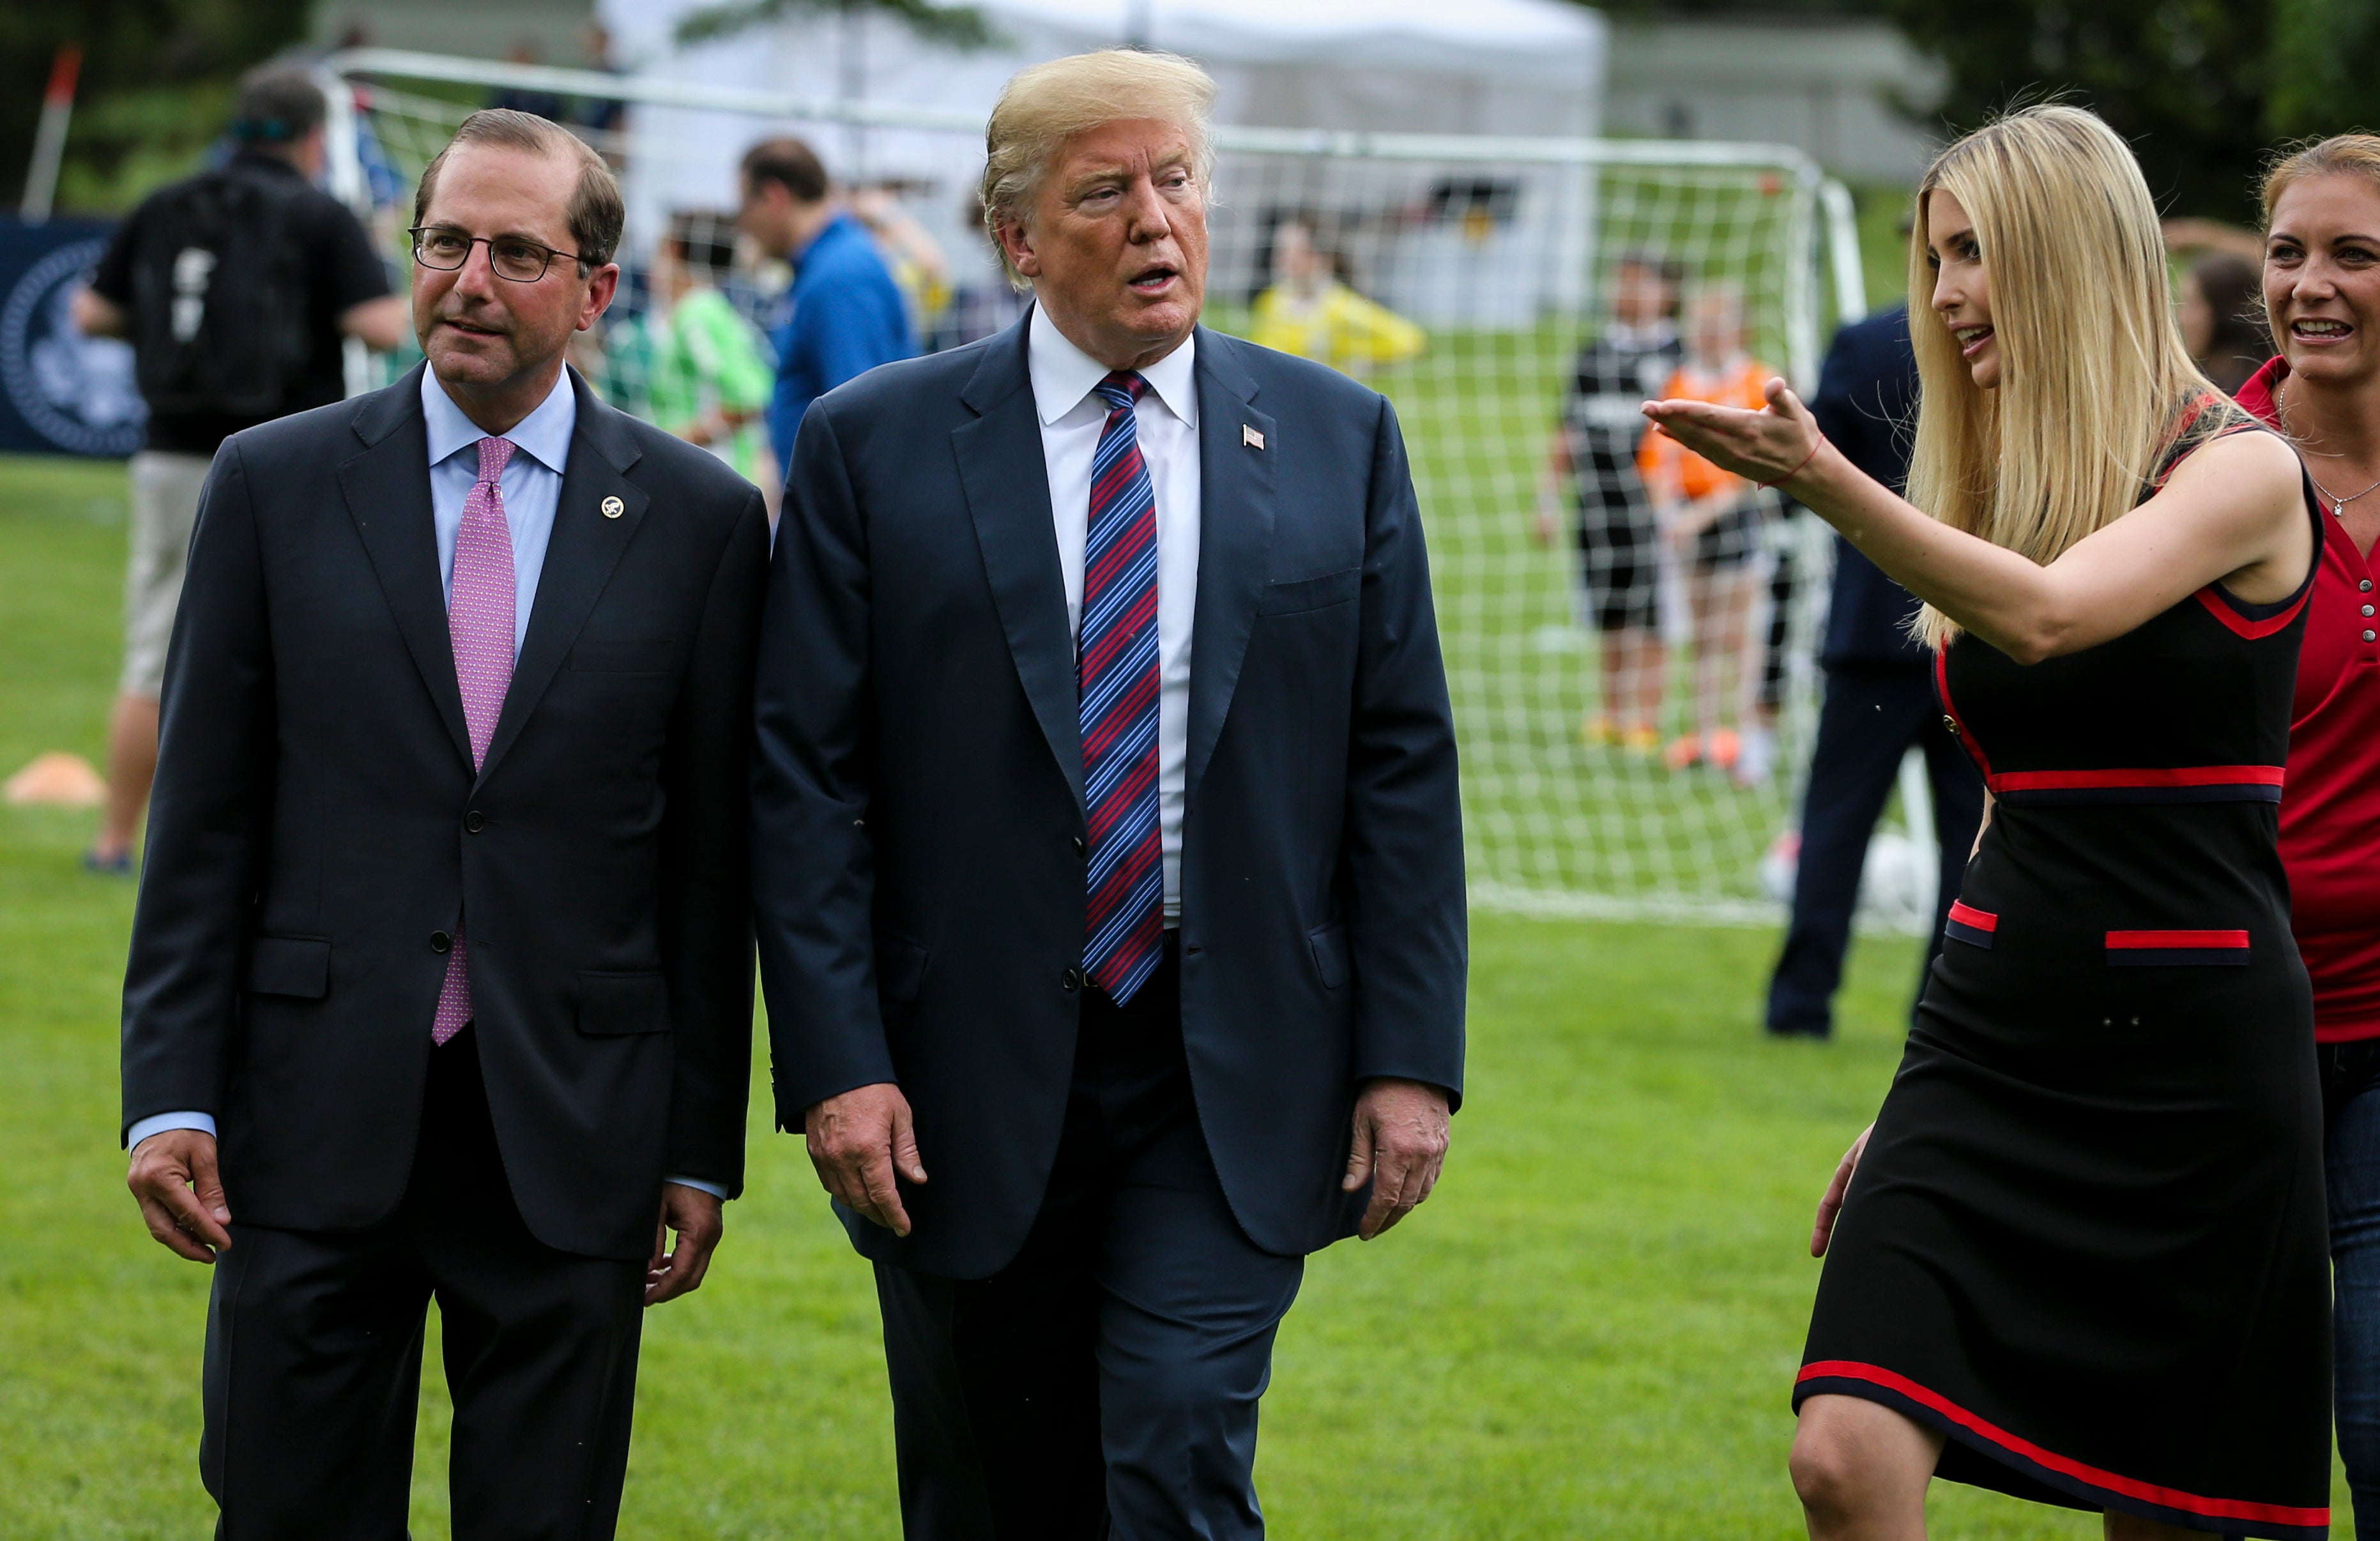 President Donald Trump, center, Health And Human Services Secretary Alex Azar, left, and Ivanka Trump, right, walk together on the South Lawn of the White House on May 30, 2018.